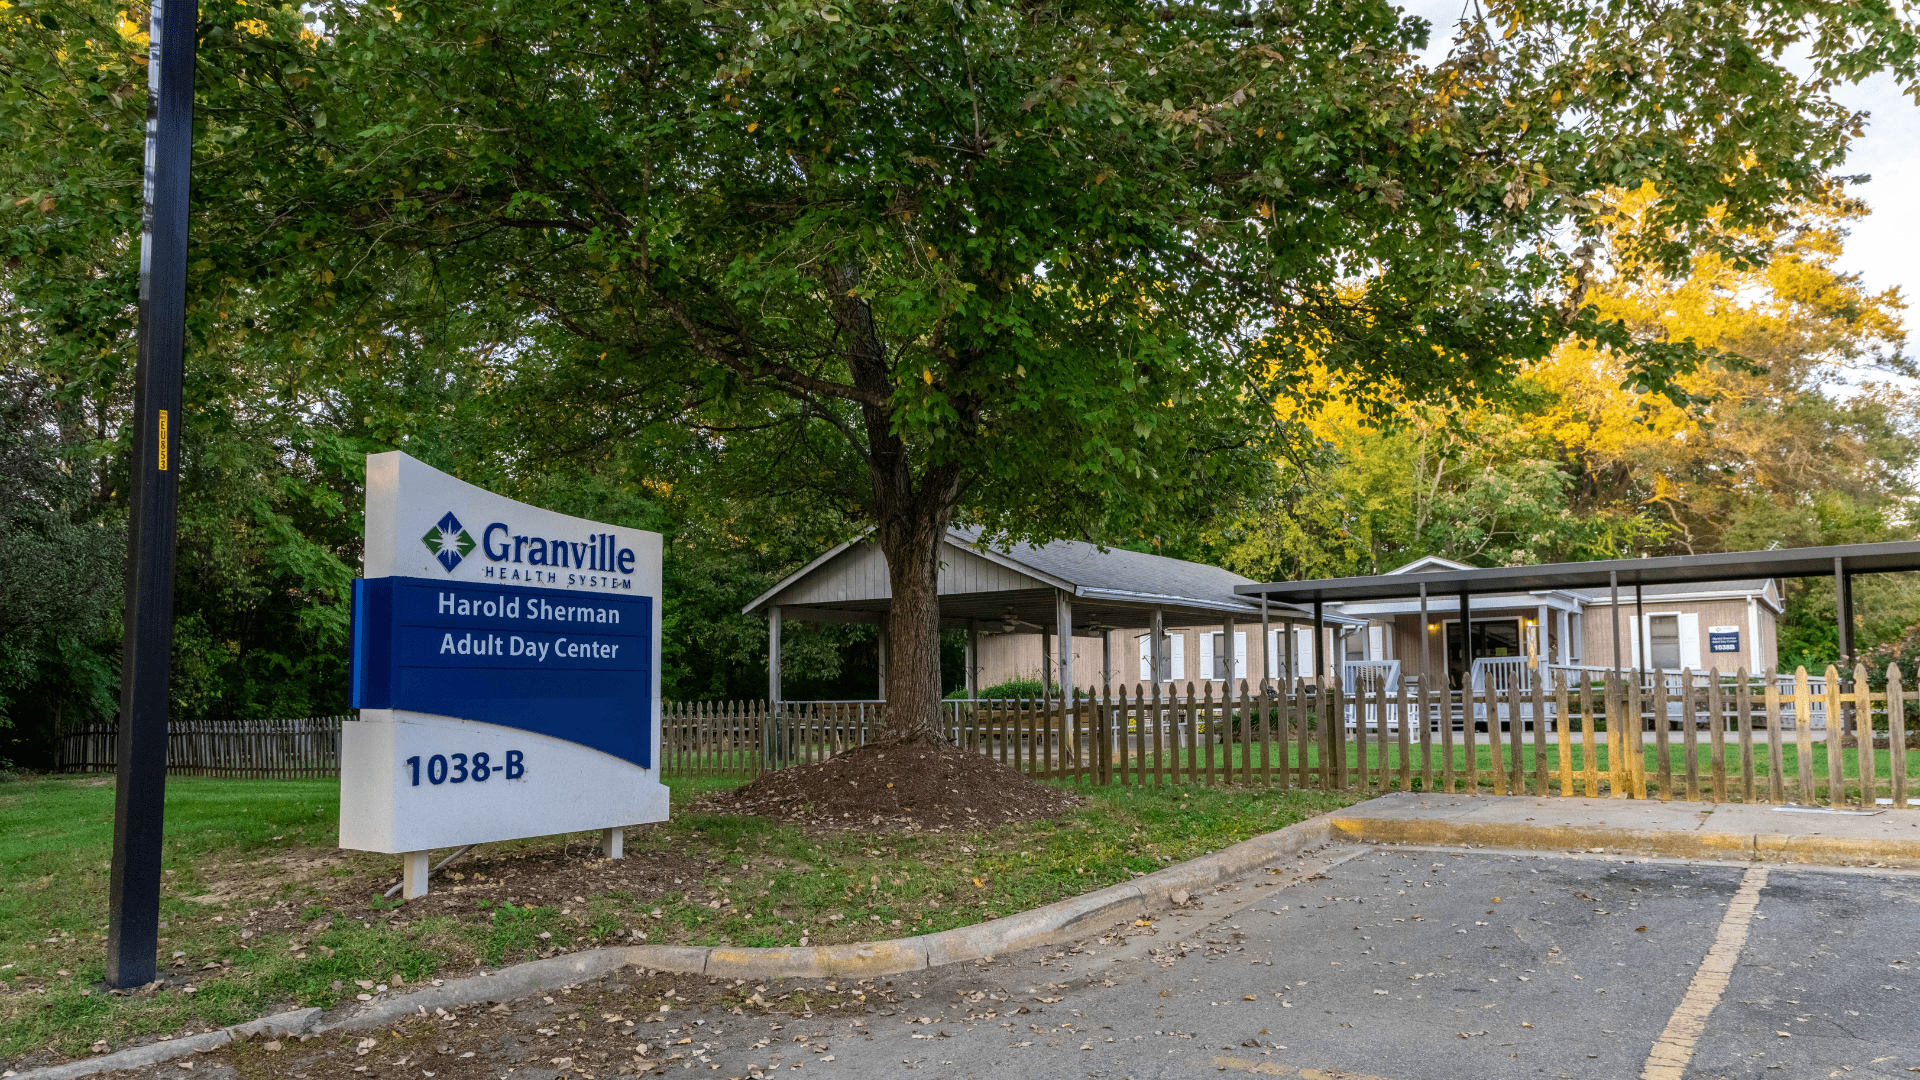 Exterior shot of the front of Granville Health System's Harold Sherman Adult Care Center with sign displaying the center's name